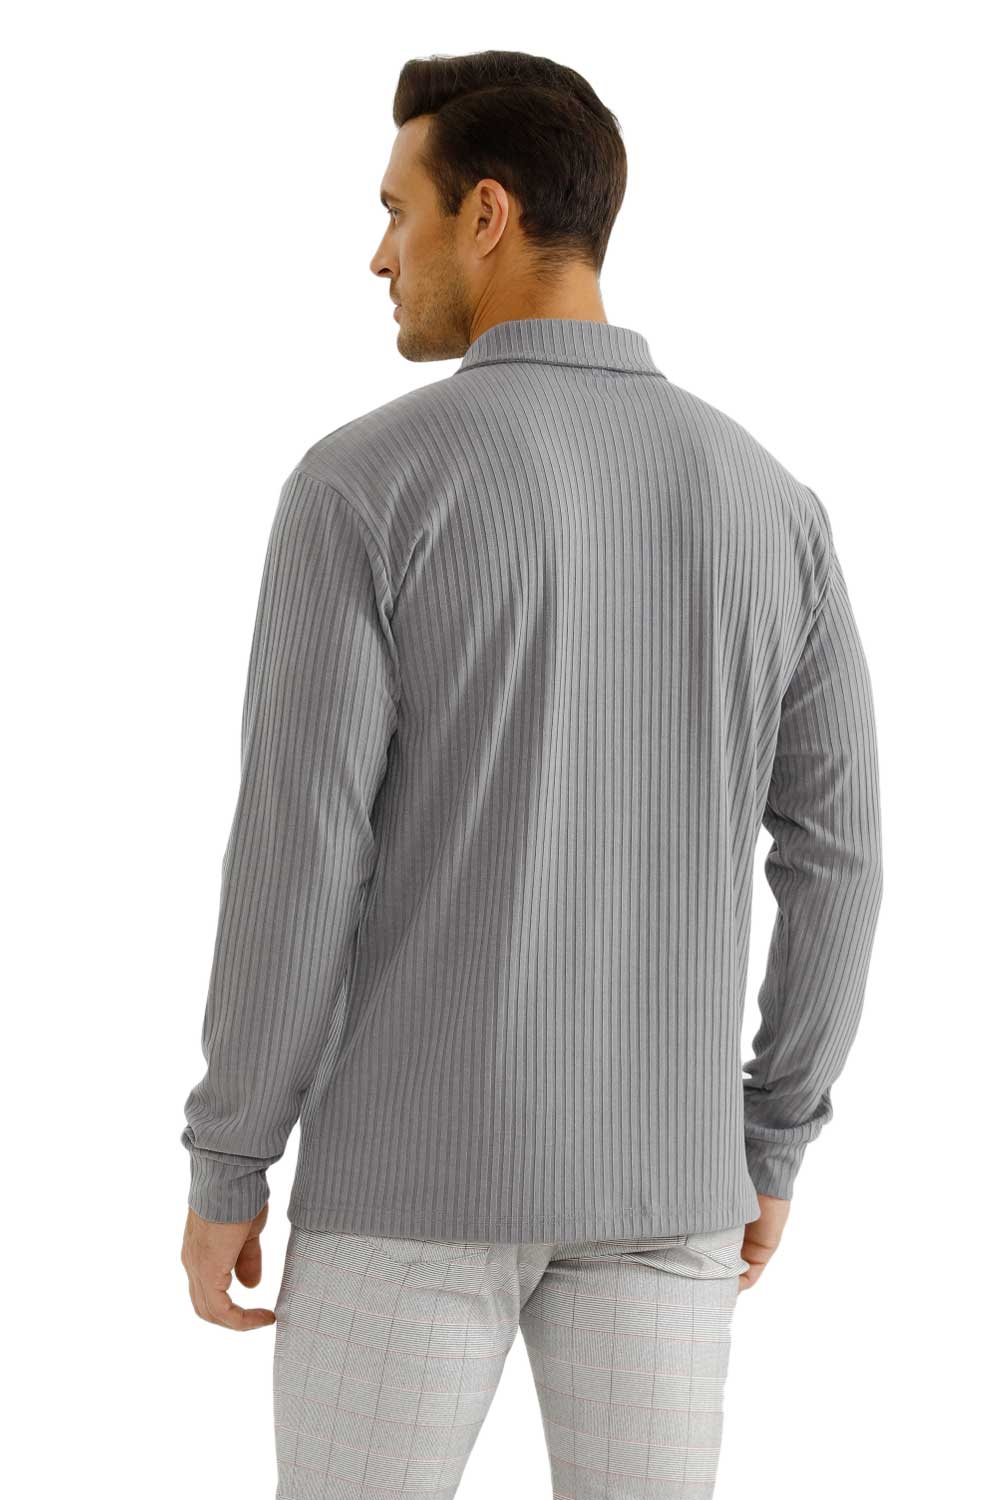 long sleeve polo shirts for men